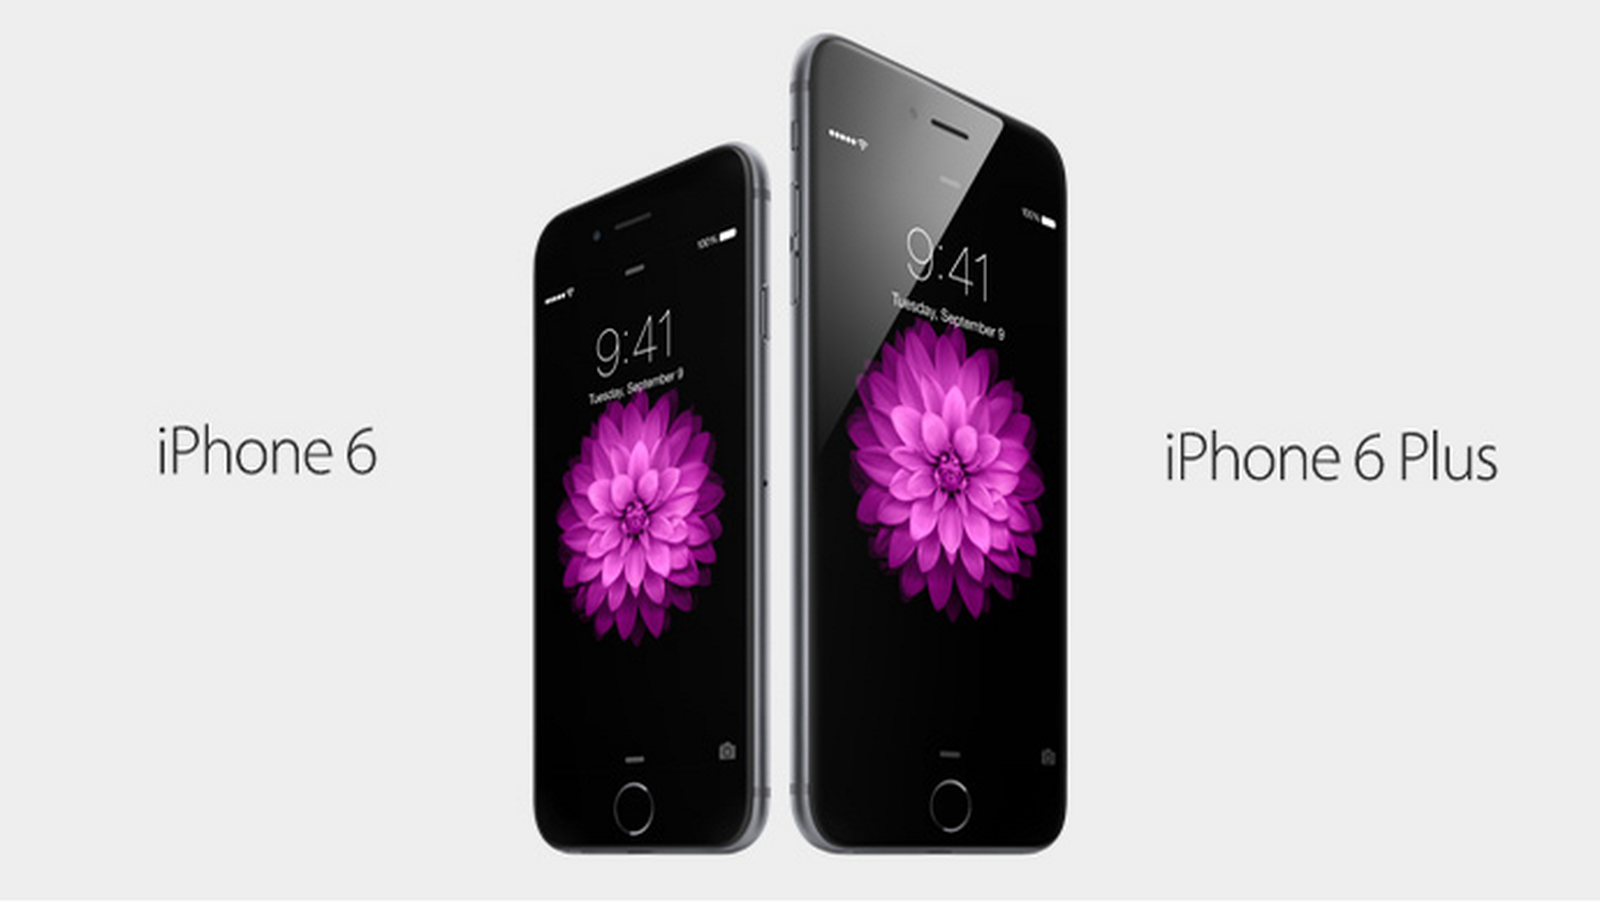 Apple Announces 4 7 Inch Iphone 6 And 5 5 Inch Iphone 6 Plus Launching September 19 Macrumors